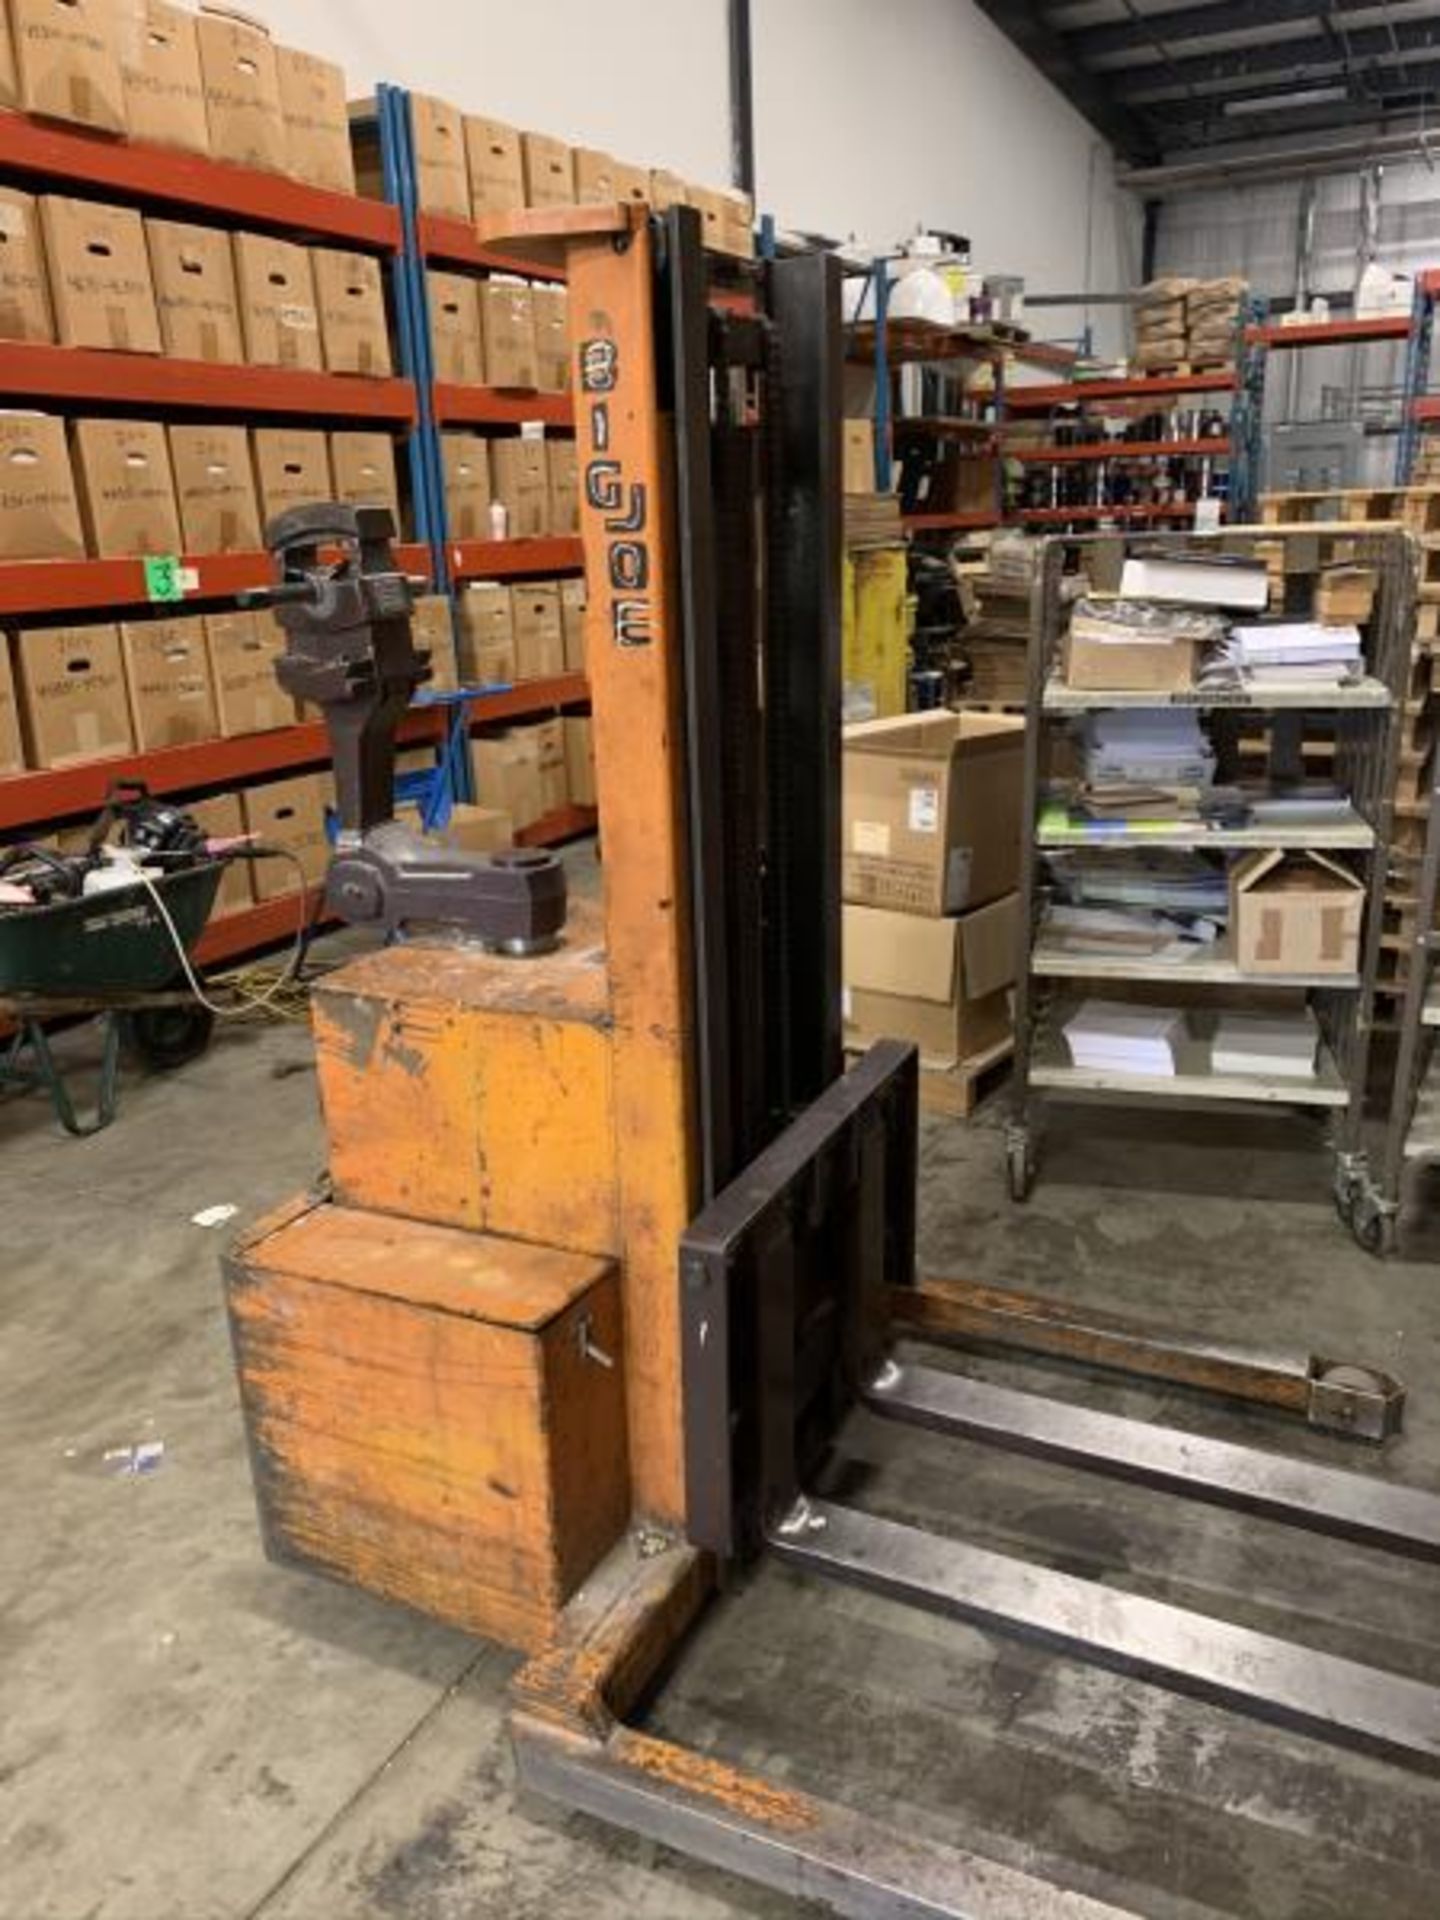 Big Joe Jakster electrical pallet jack, works but likely needs new battery, Model: B7796-LO, SN: - Image 4 of 4